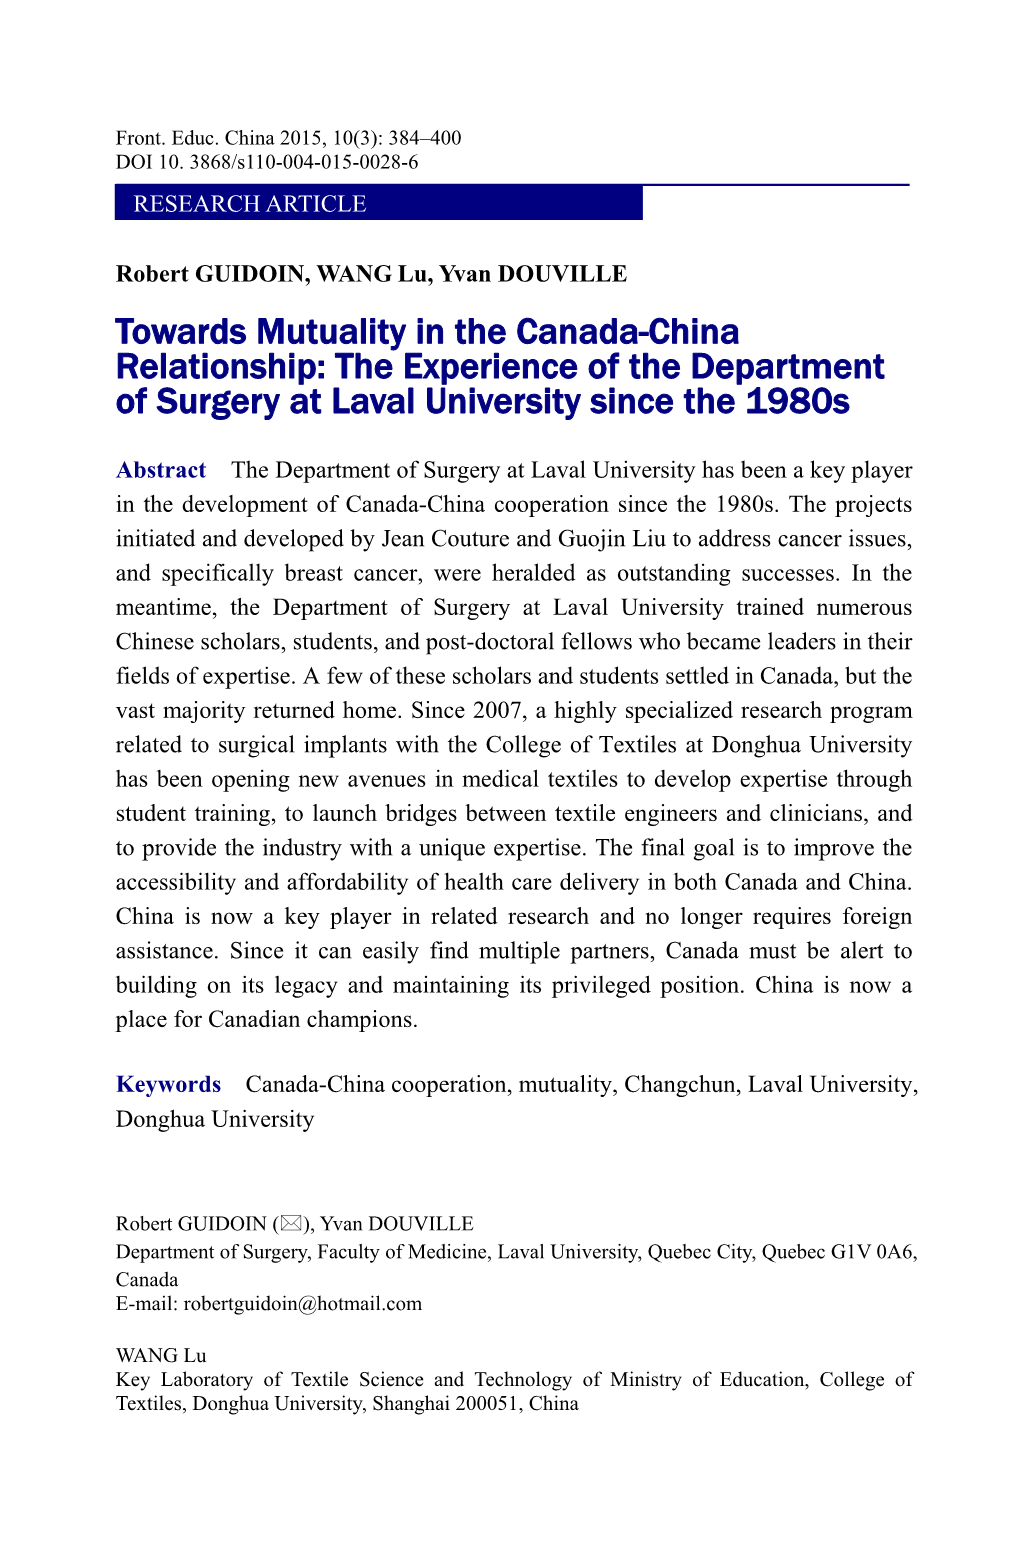 Towards Mutuality in the Canada-China Relationship: the Experience of the Department of Surgery at Laval University Since the 1980S